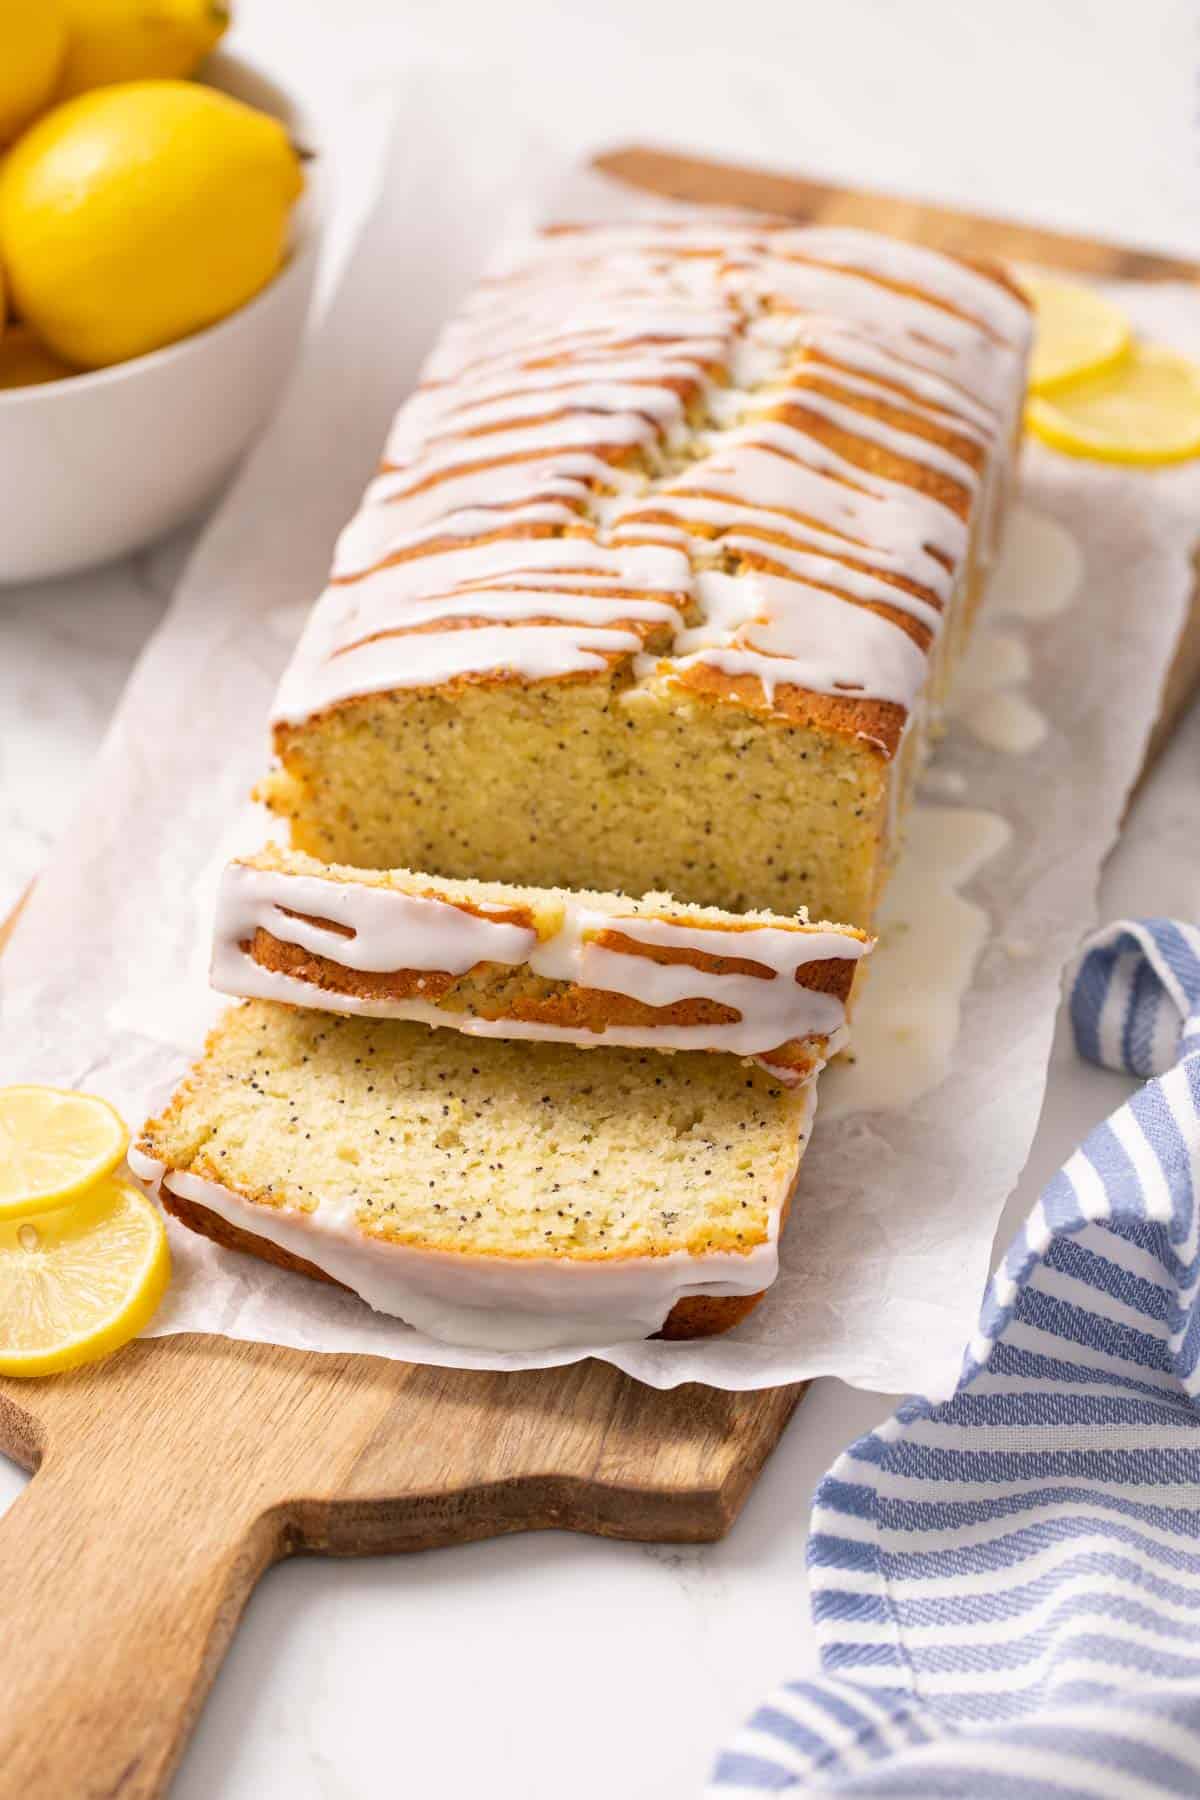 A glazed loaf of lemon poppy seed bread with two slices cut.